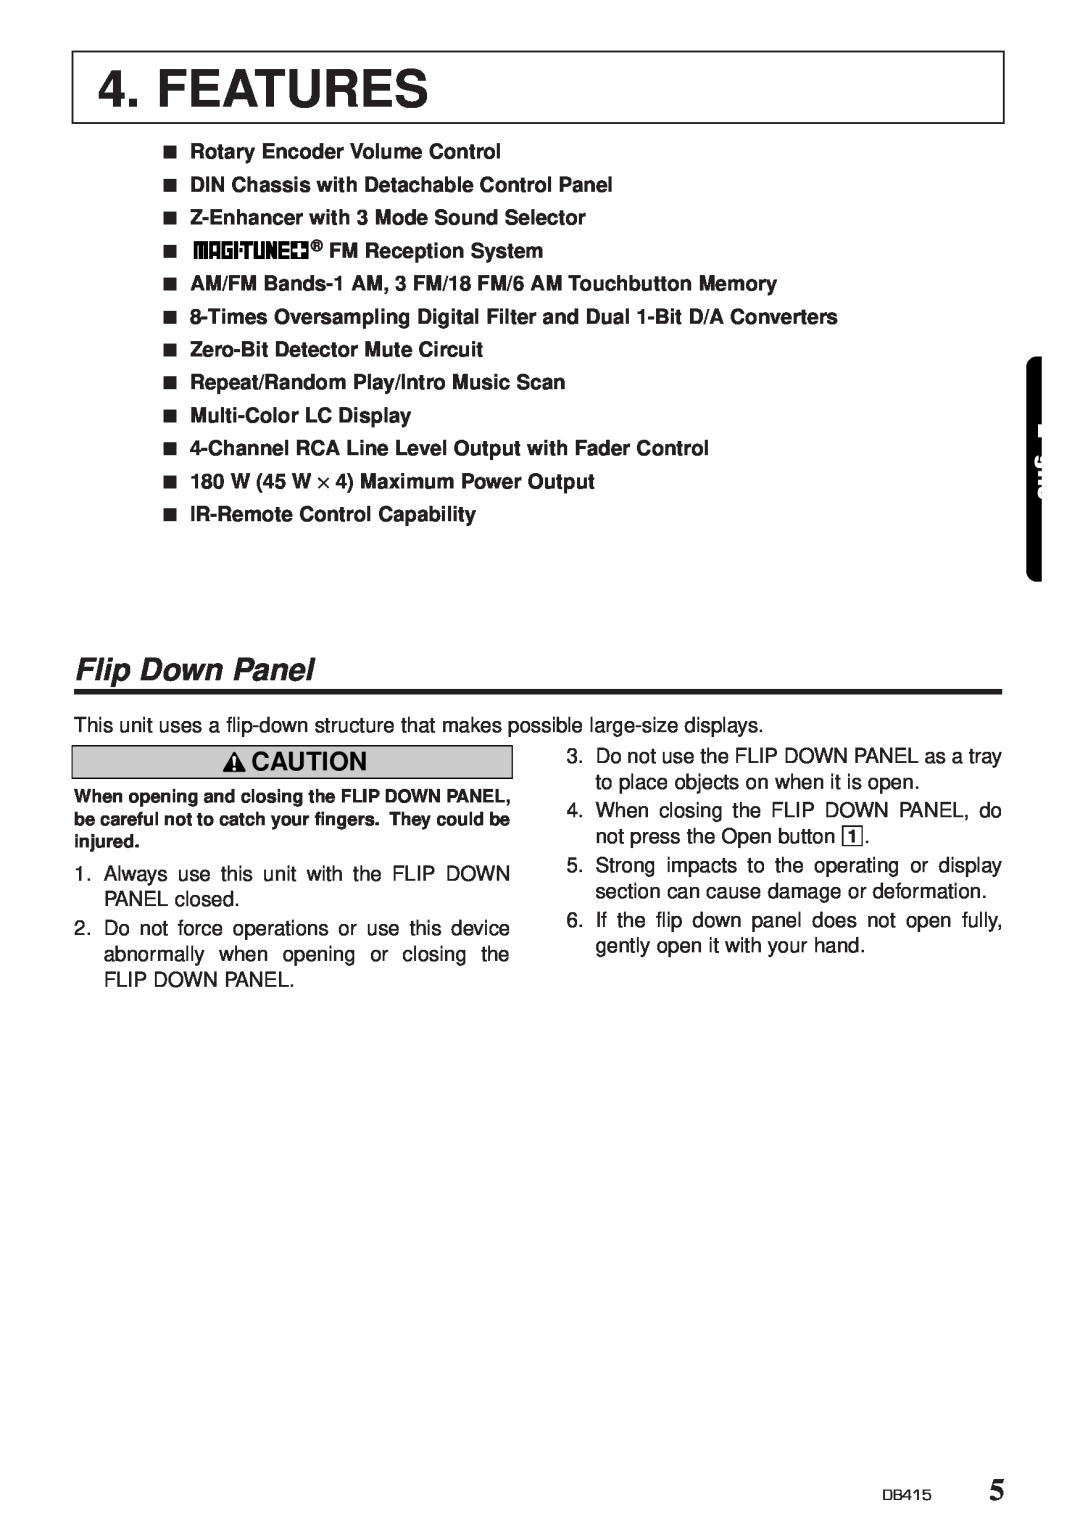 Clarion DB415 owner manual Features, Flip Down Panel 